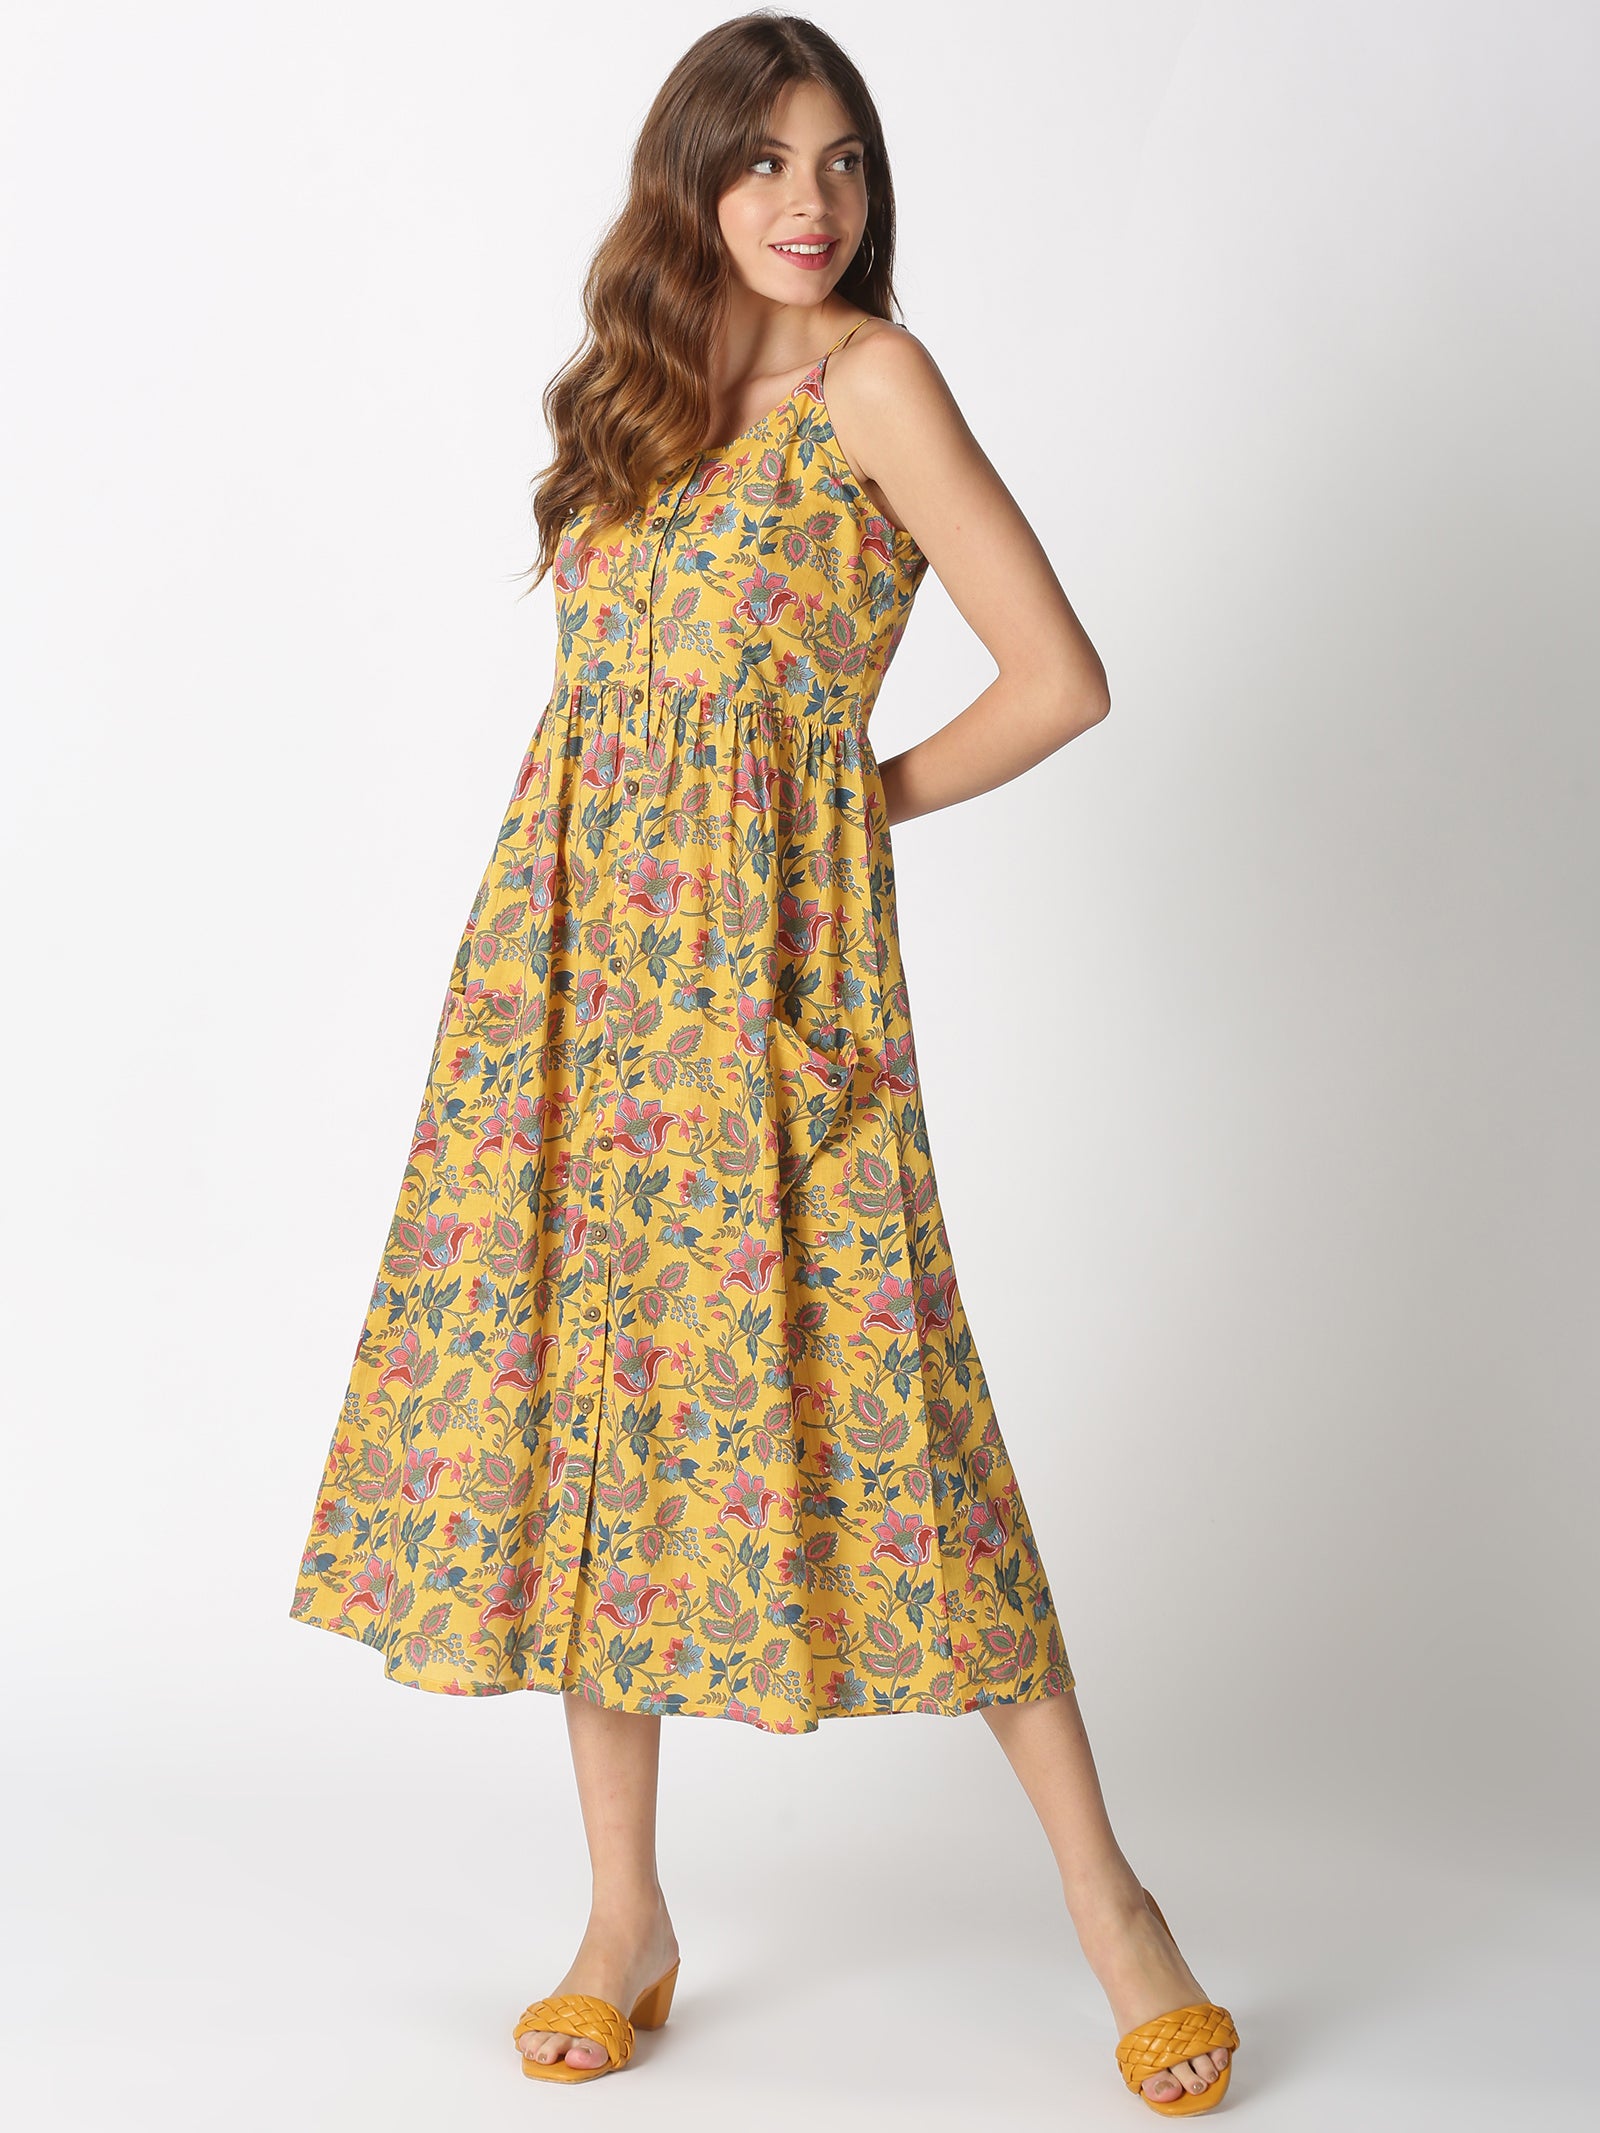 Yellow Ethnic Printed A-line Strappy Dress with Front Pockets